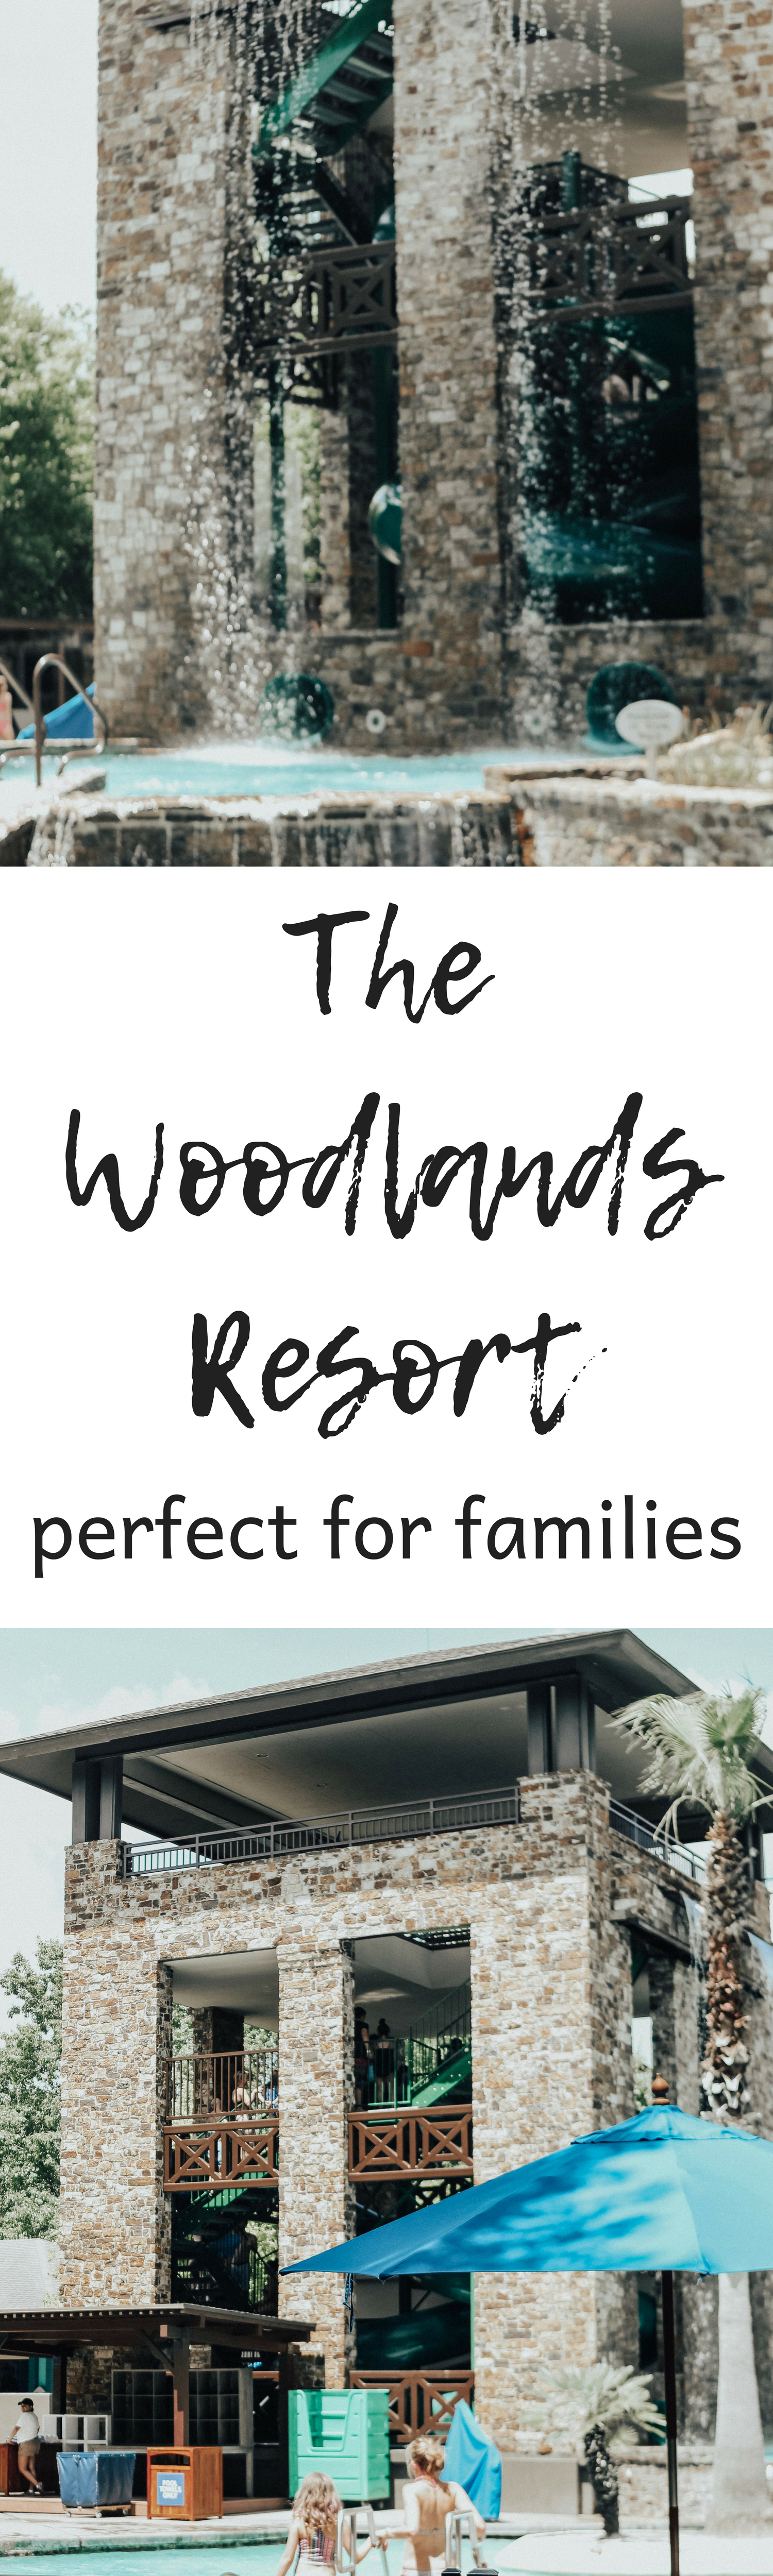 The Woodlands Resort family vacation